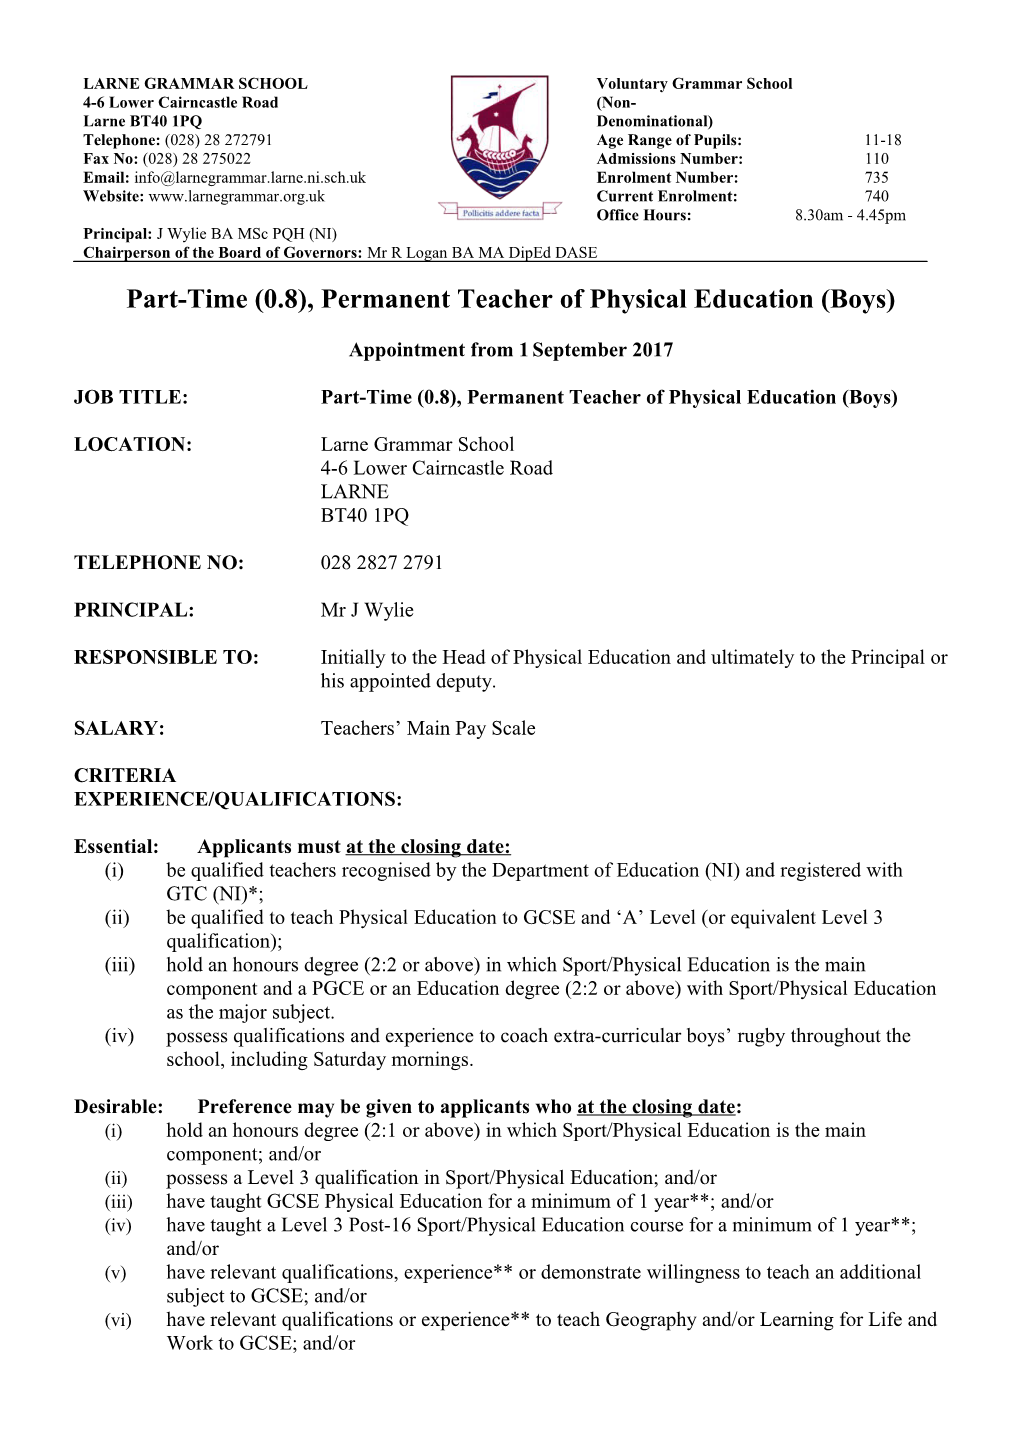 Part-Time (0.8), Permanentteacher of Physical Education (Boys)